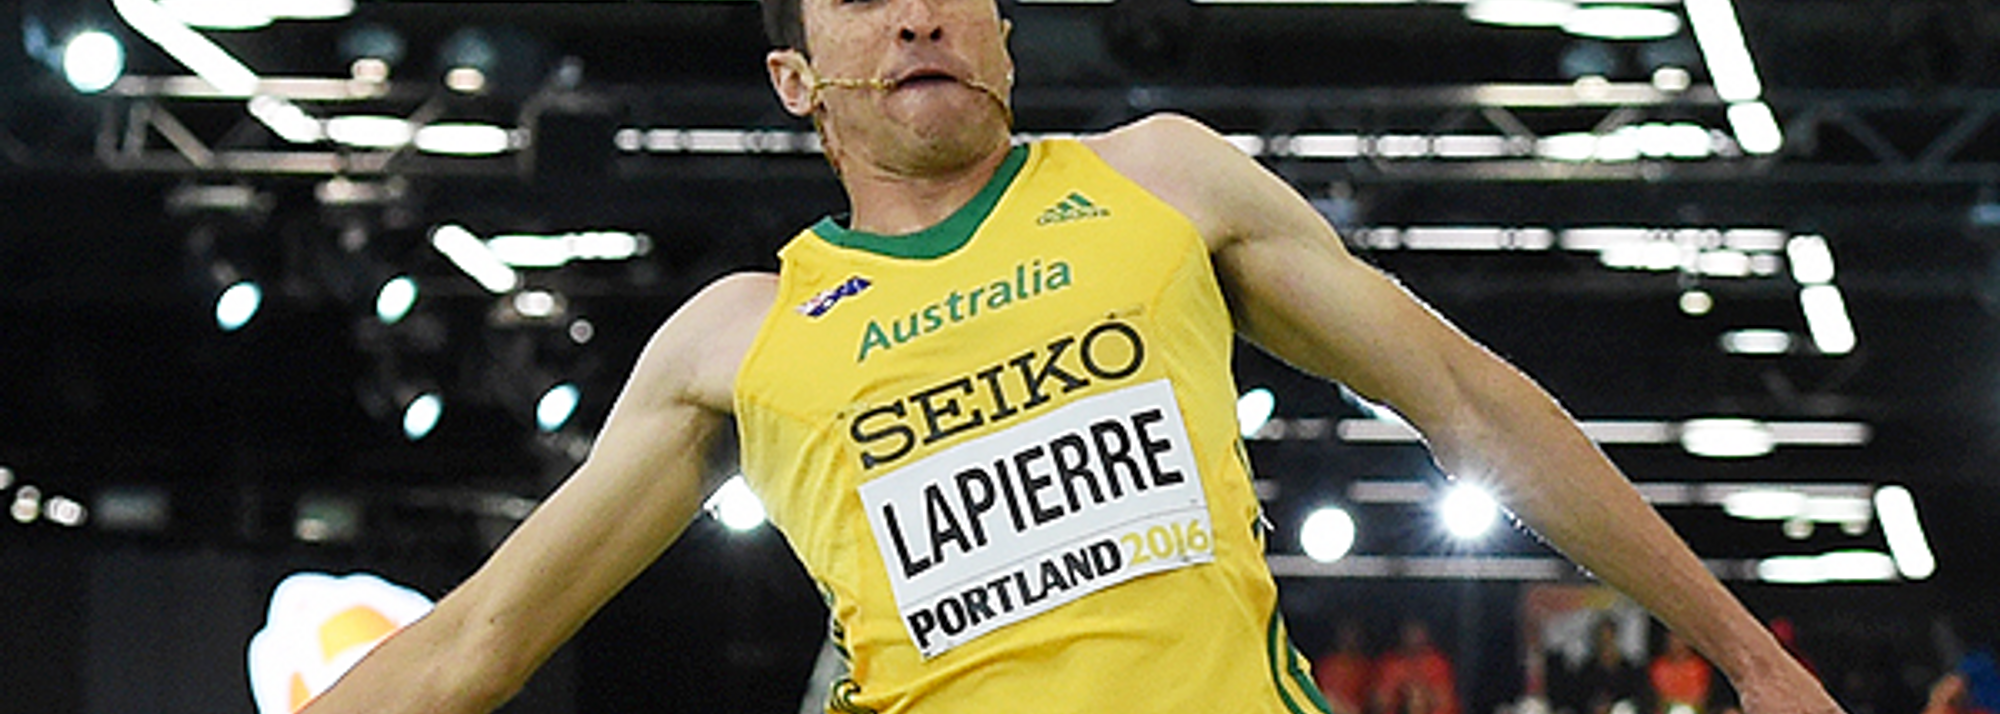 “It was my experience that helped me to stay calm and jump 8.25m in the third round and stay in the competition,” Fabrice Lapierre said about his performance at the IAAF World Indoor Championships Portland 2016.